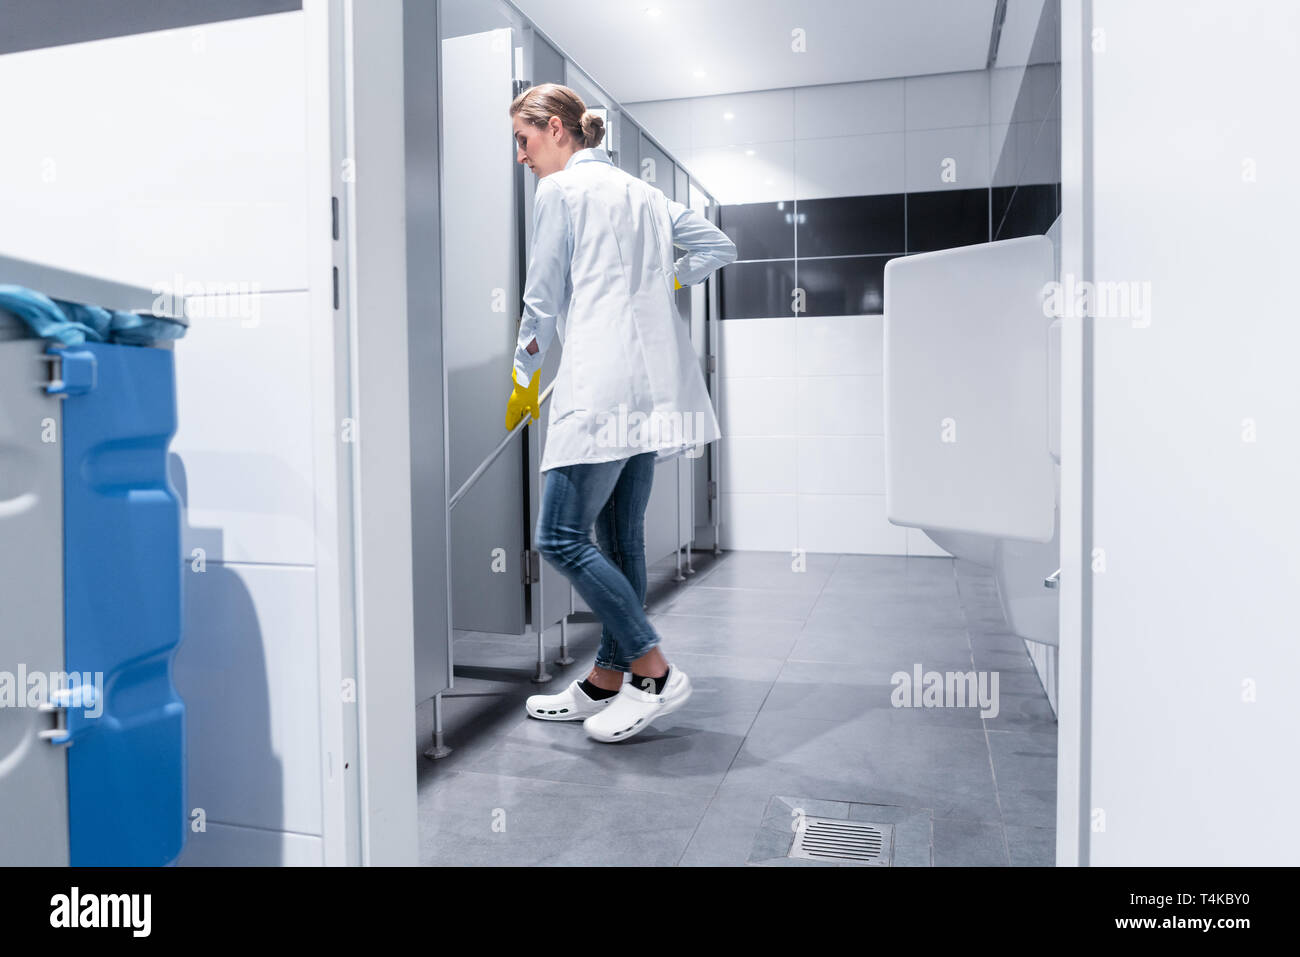 Cleaning lady or janitor mopping the floor in restroom Stock Photo